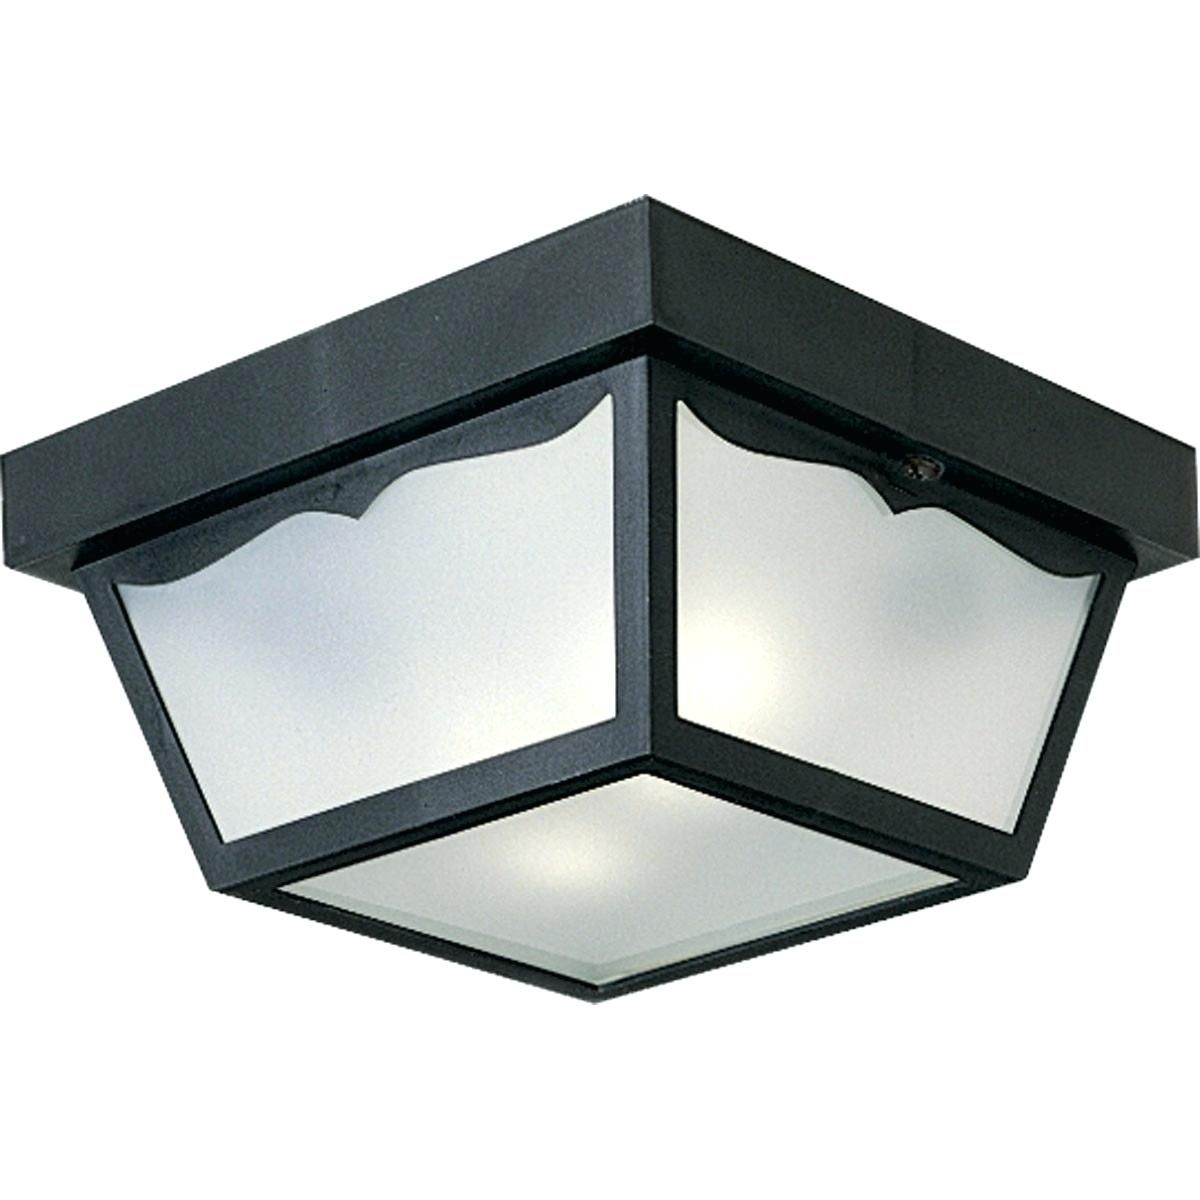 Outdoor Ceiling Light Fan Cover Plastic Diffuser Lamp Shade Fixtures For Outdoor Ceiling Light Fixture With Outlet (View 7 of 15)